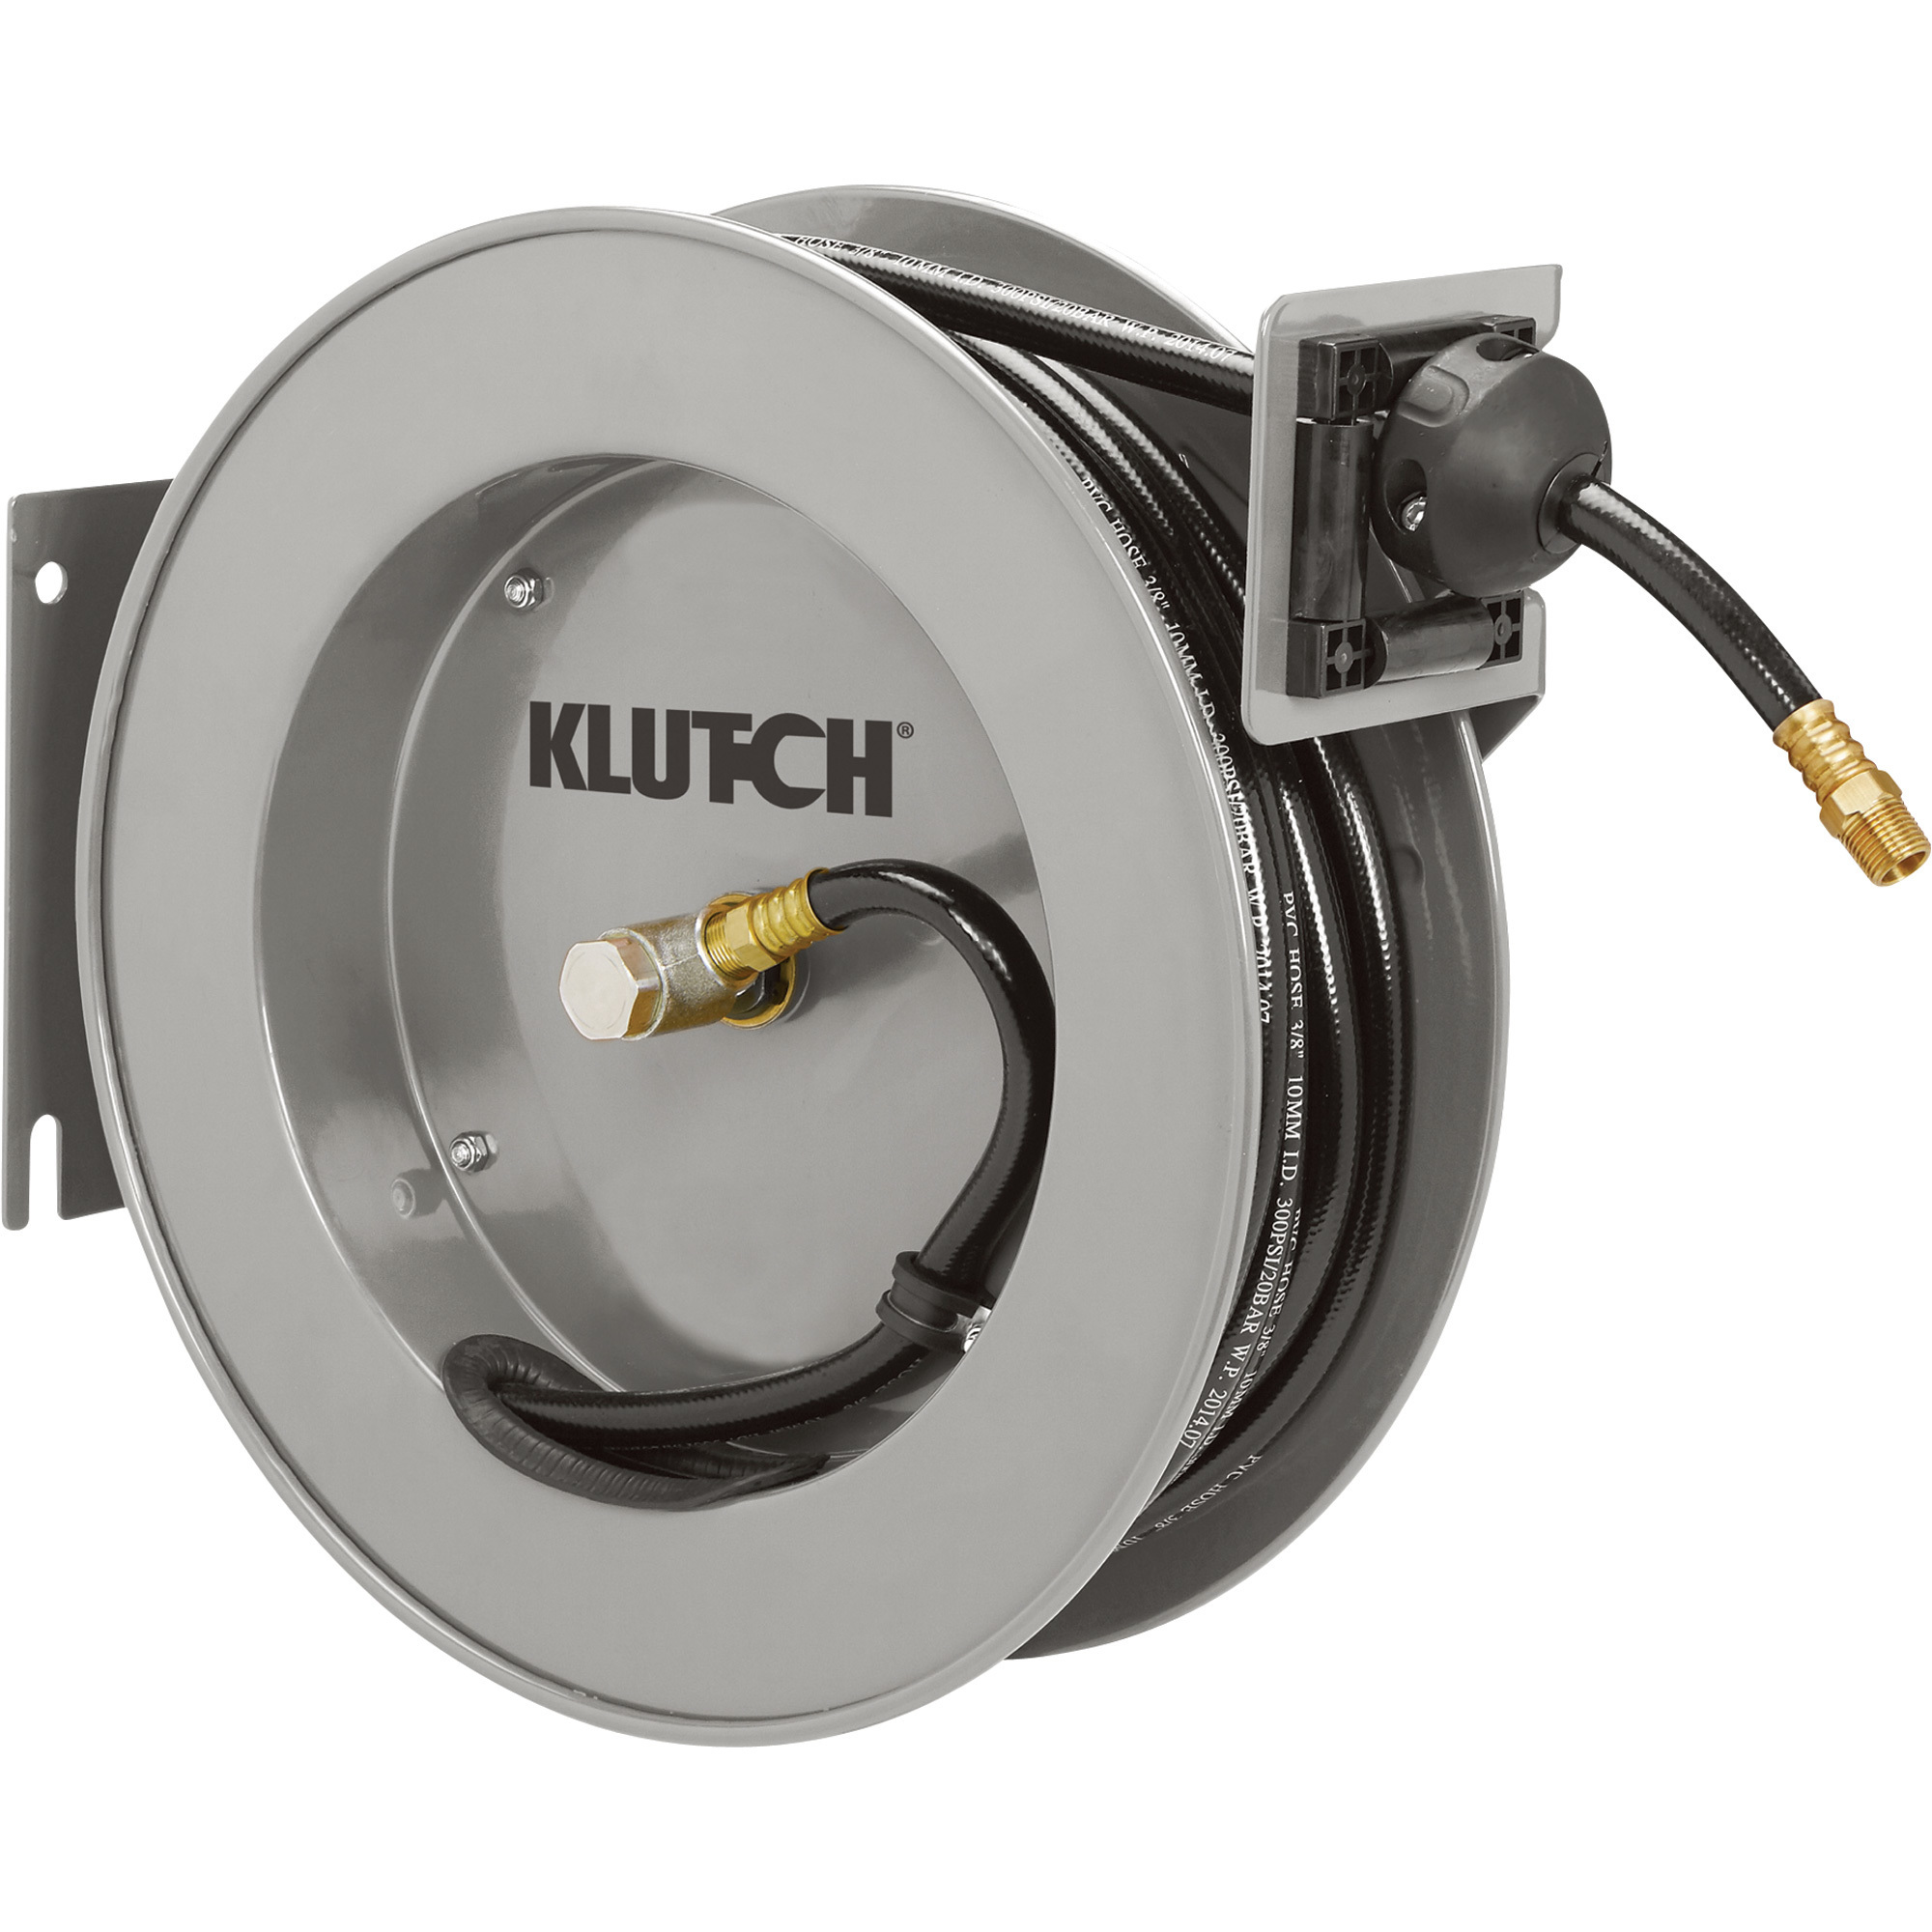 Klutch Auto Rewind Air Hose Reel, With 3/8in. x 50ft. PVC Hose, Max. 300  PSI